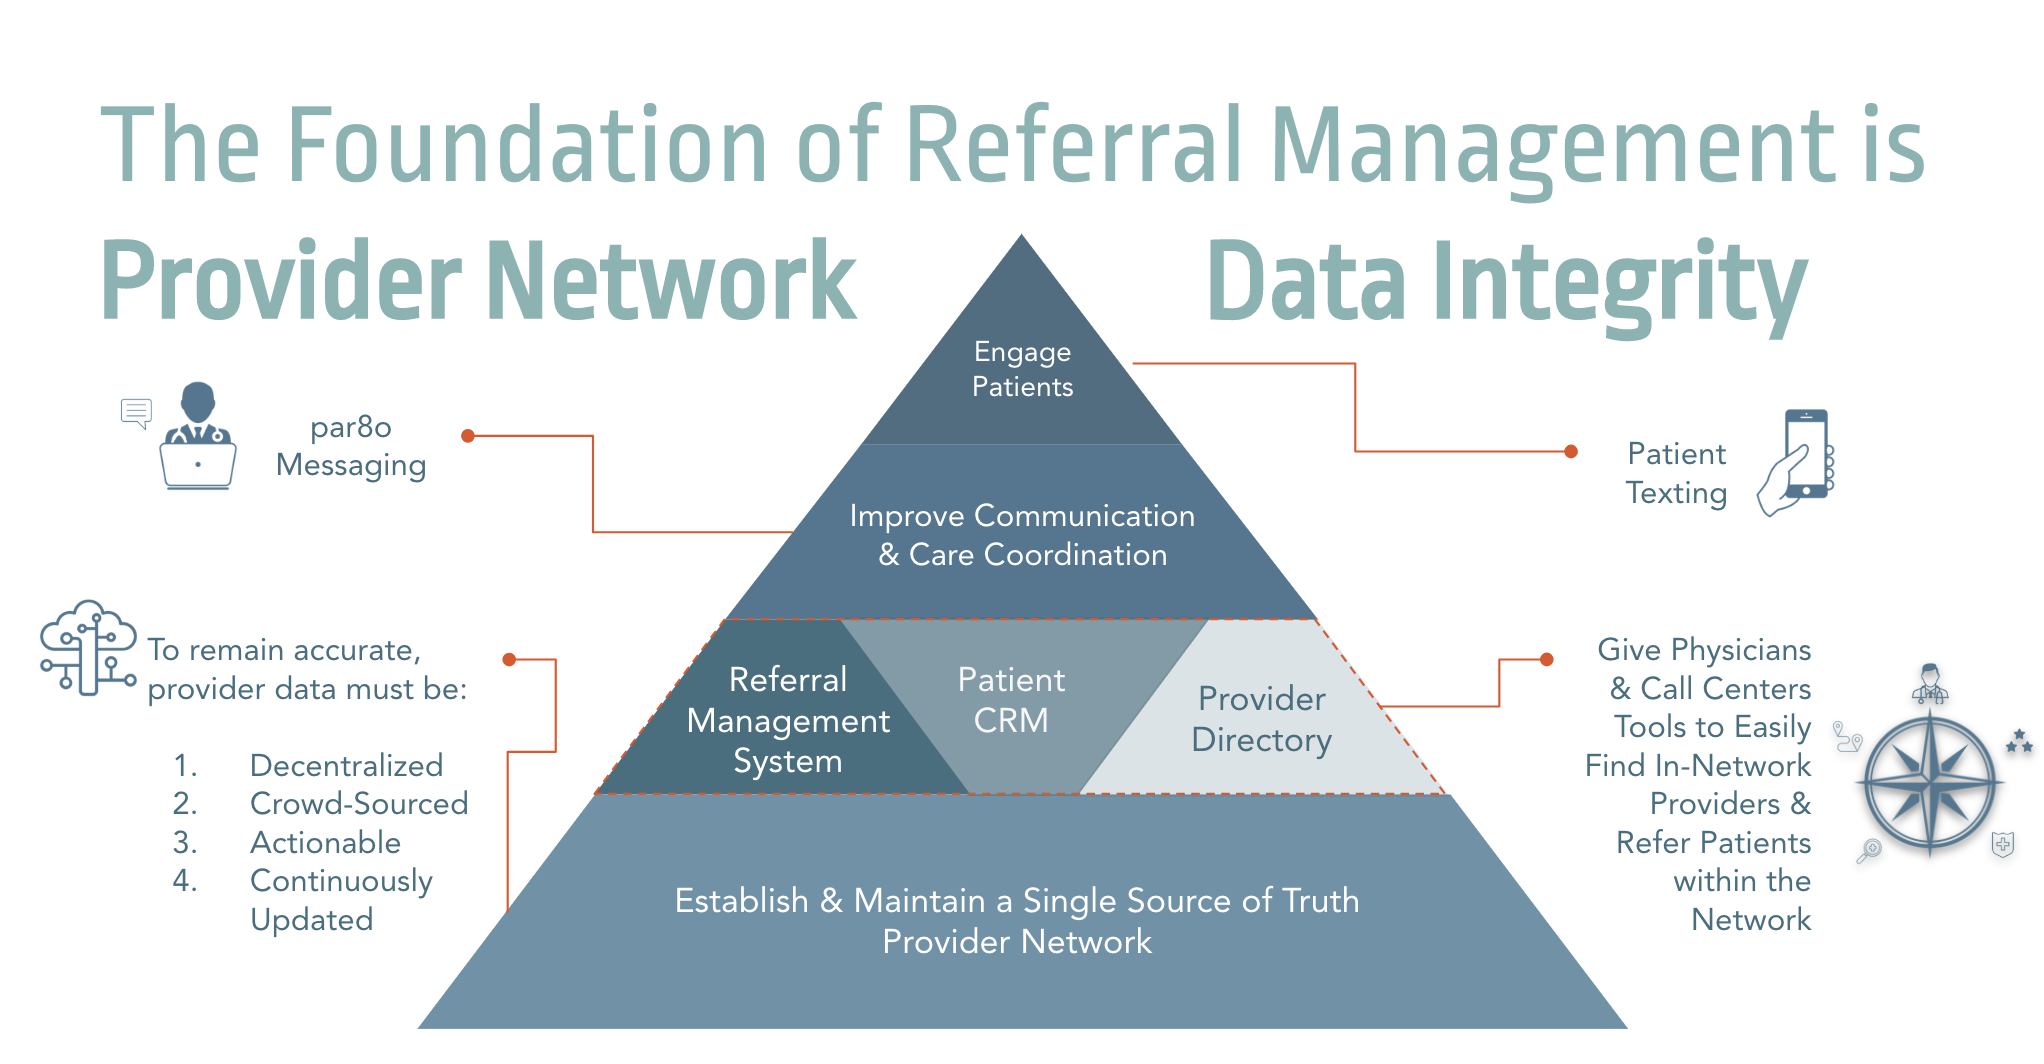 Provider Network Data Integrity is the Foundation of Good Referral Management